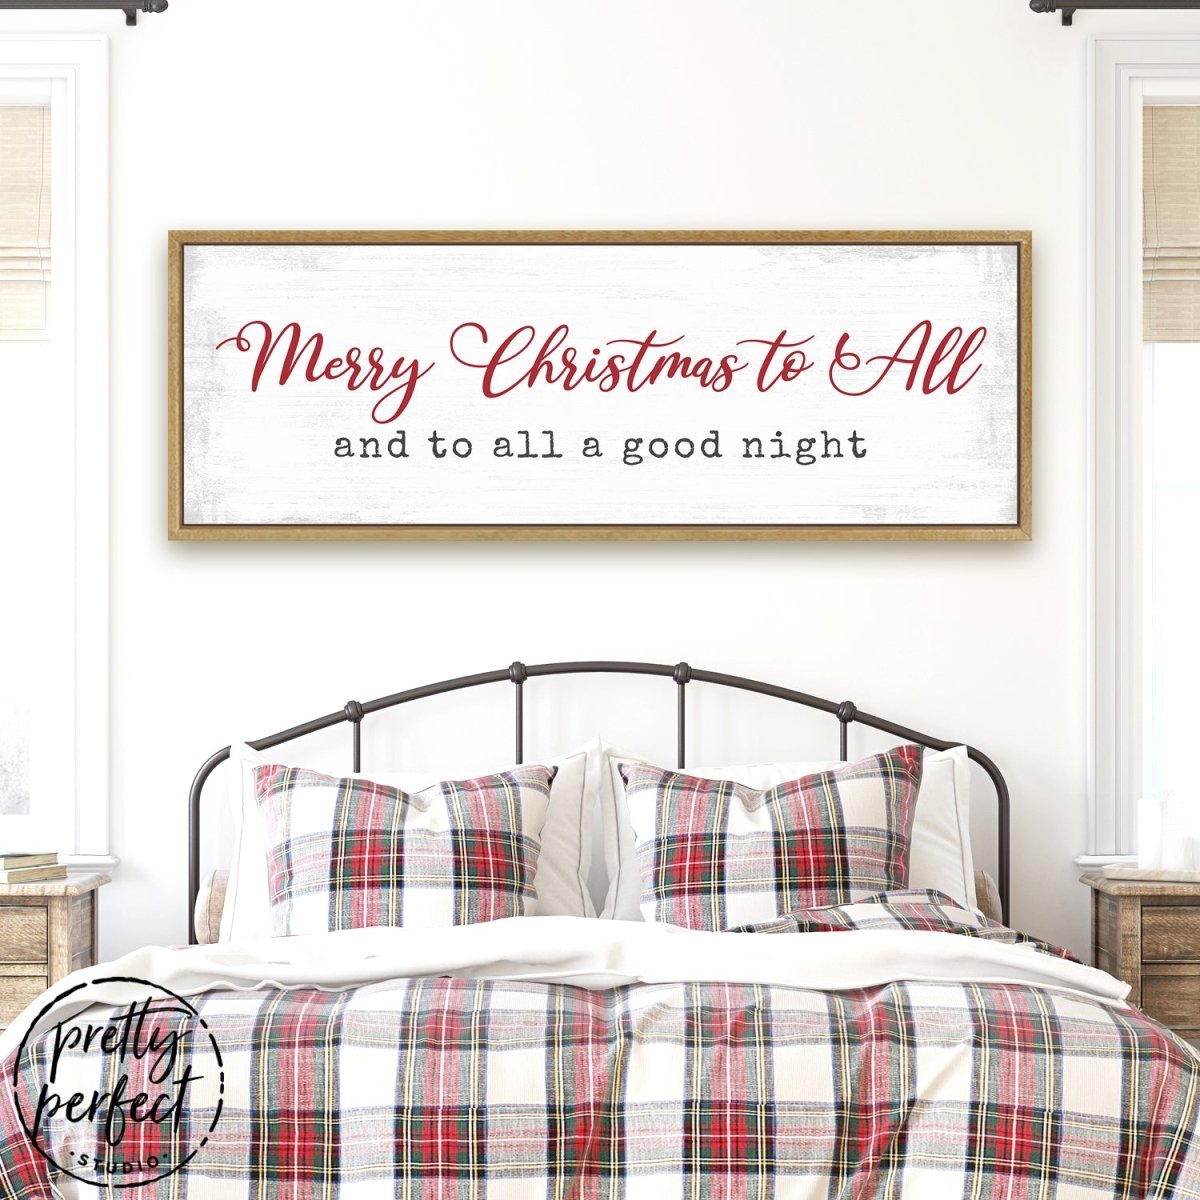 Merry Christmas to All And To All A Good Night Sign Above Bed - Pretty Perfect Studio